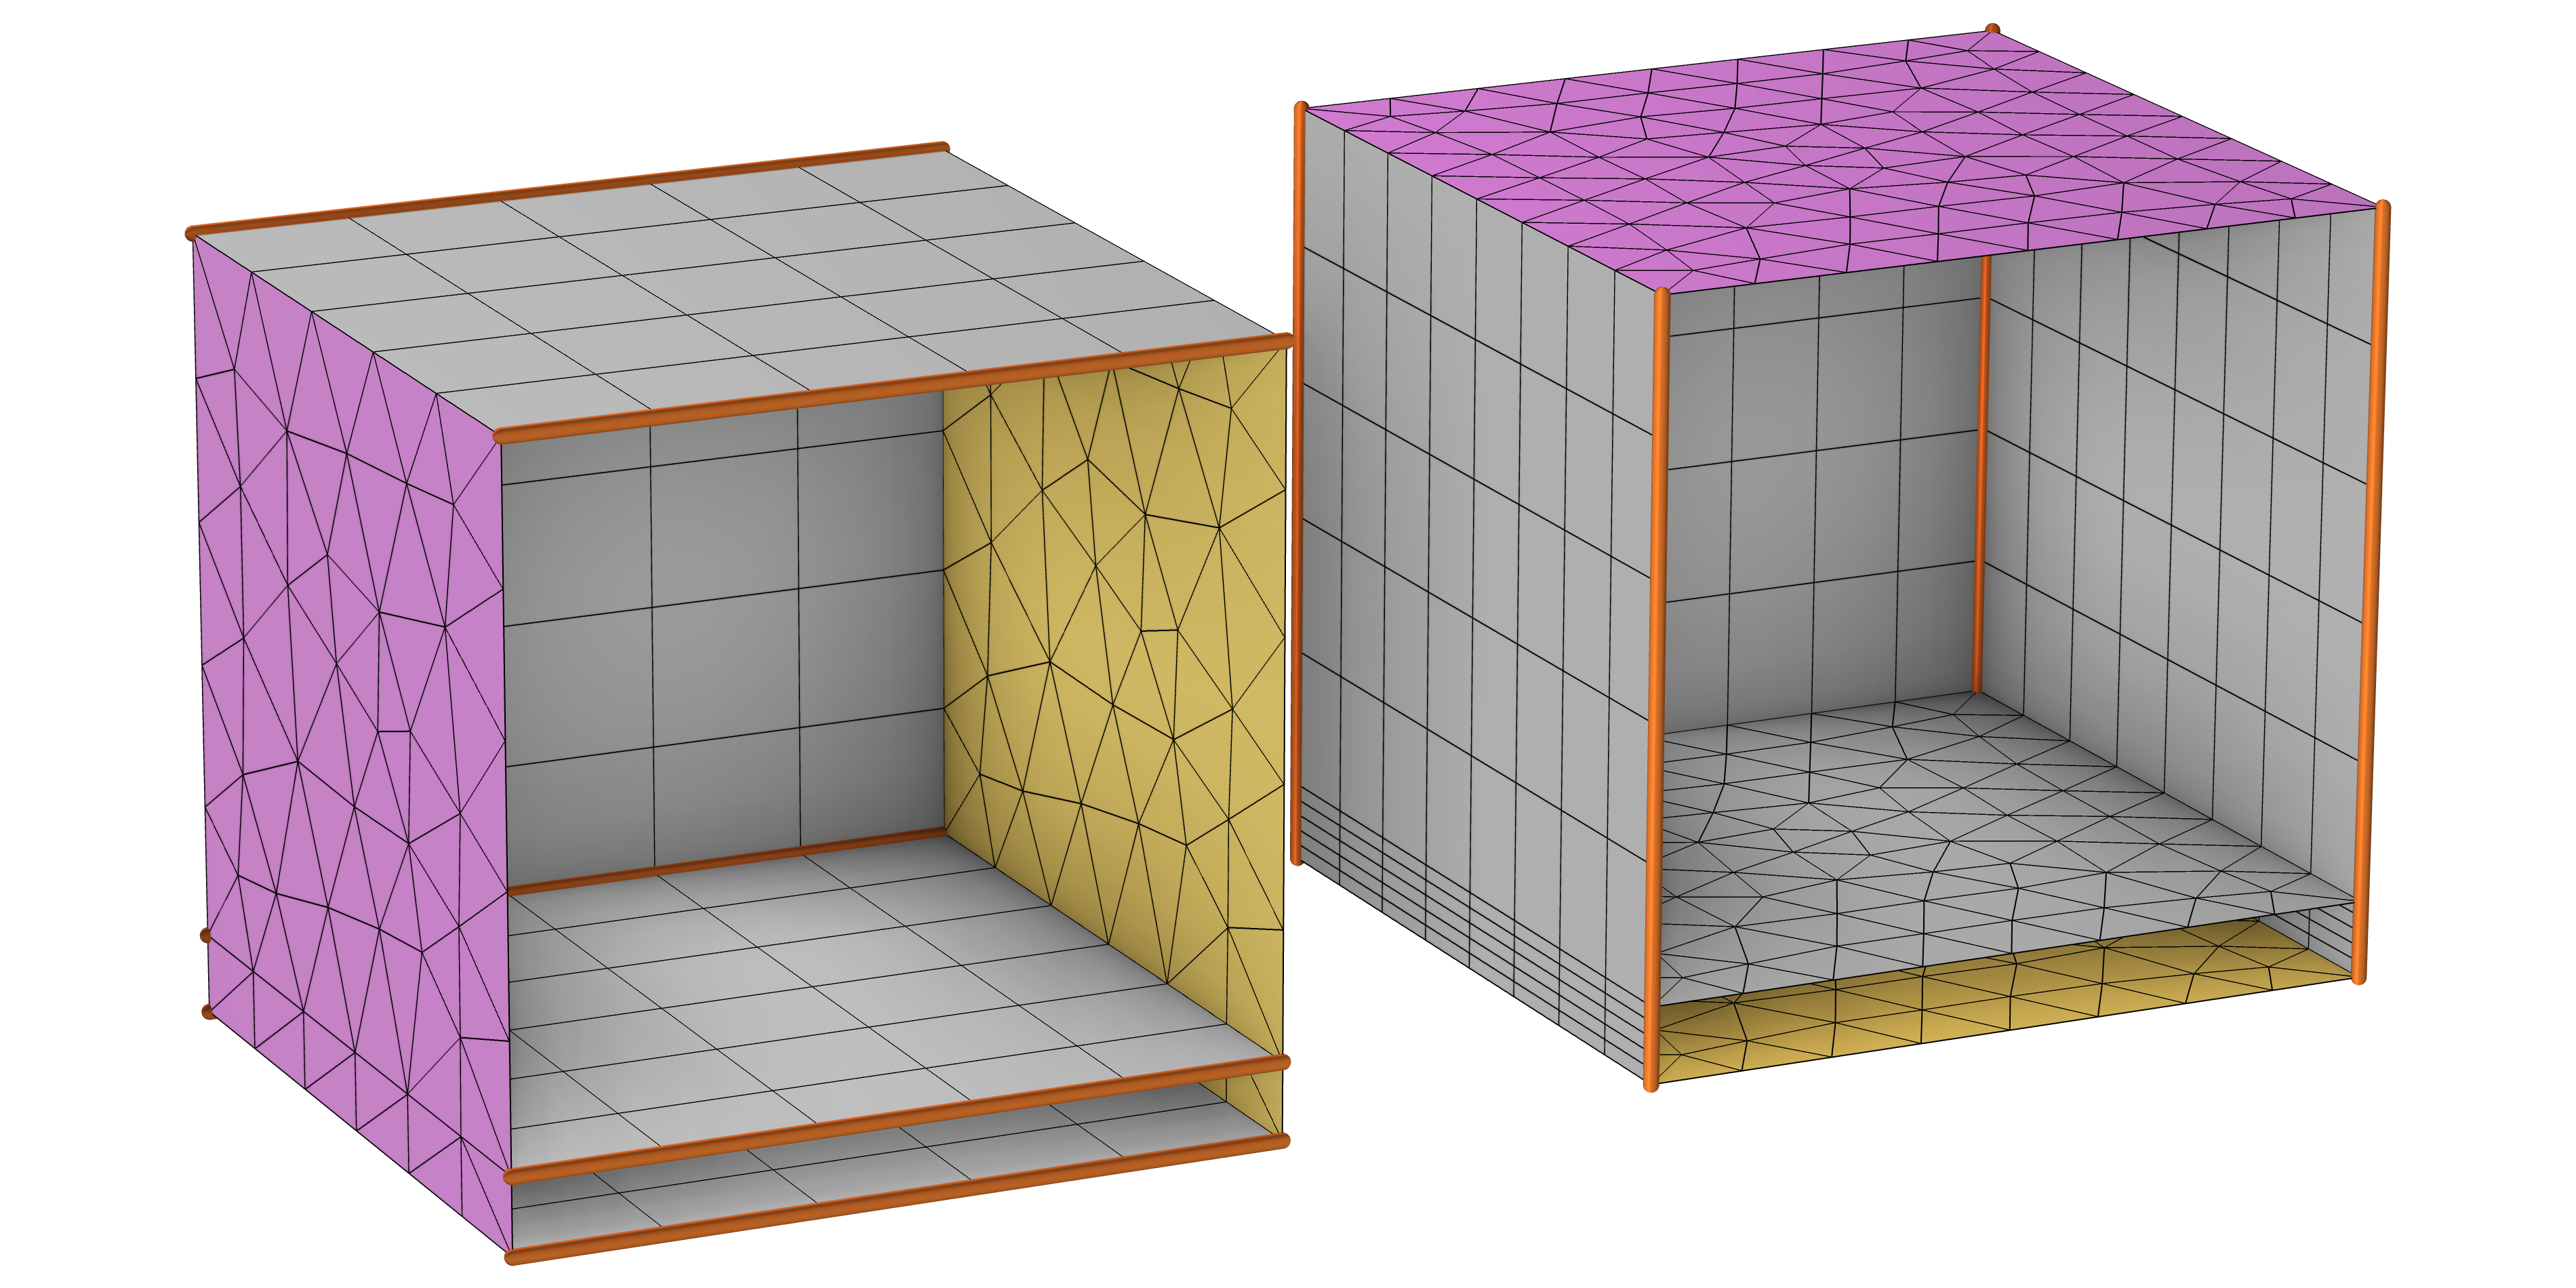 Two images of a block geometry meshed with different sweep directions; in the left image, the left face of the block is purple, and the right face of the block is orange. In the right image, the top face of the block is purple, and the bottom face of the block is orange.